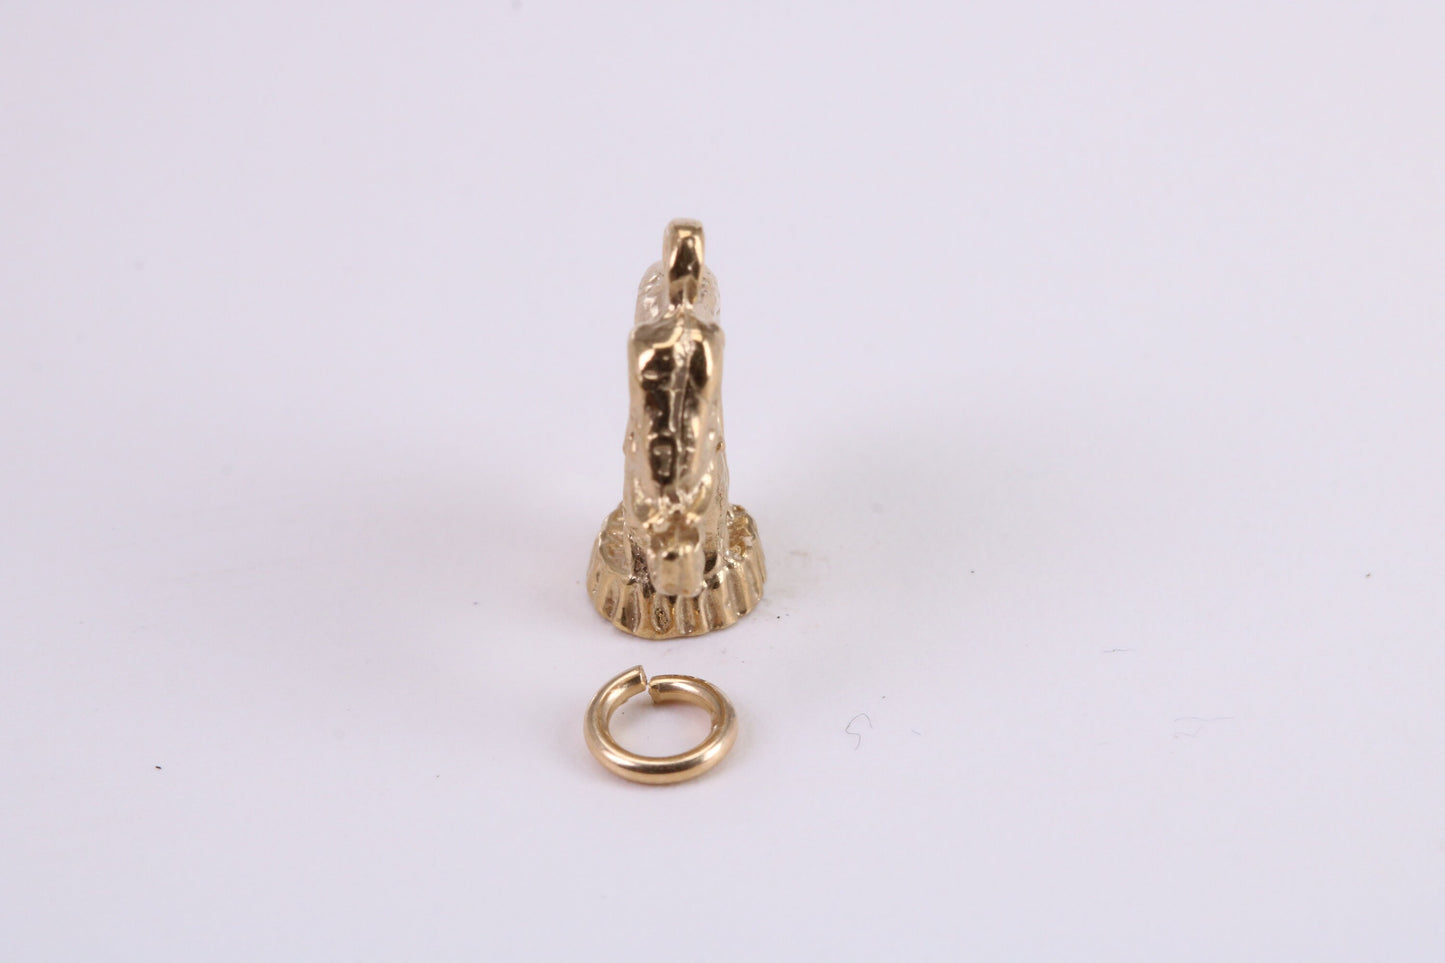 Circus Elephant Charm, Traditional Charm, Made from Solid Yellow Gold, British Hallmarked, Complete with Attachment Link